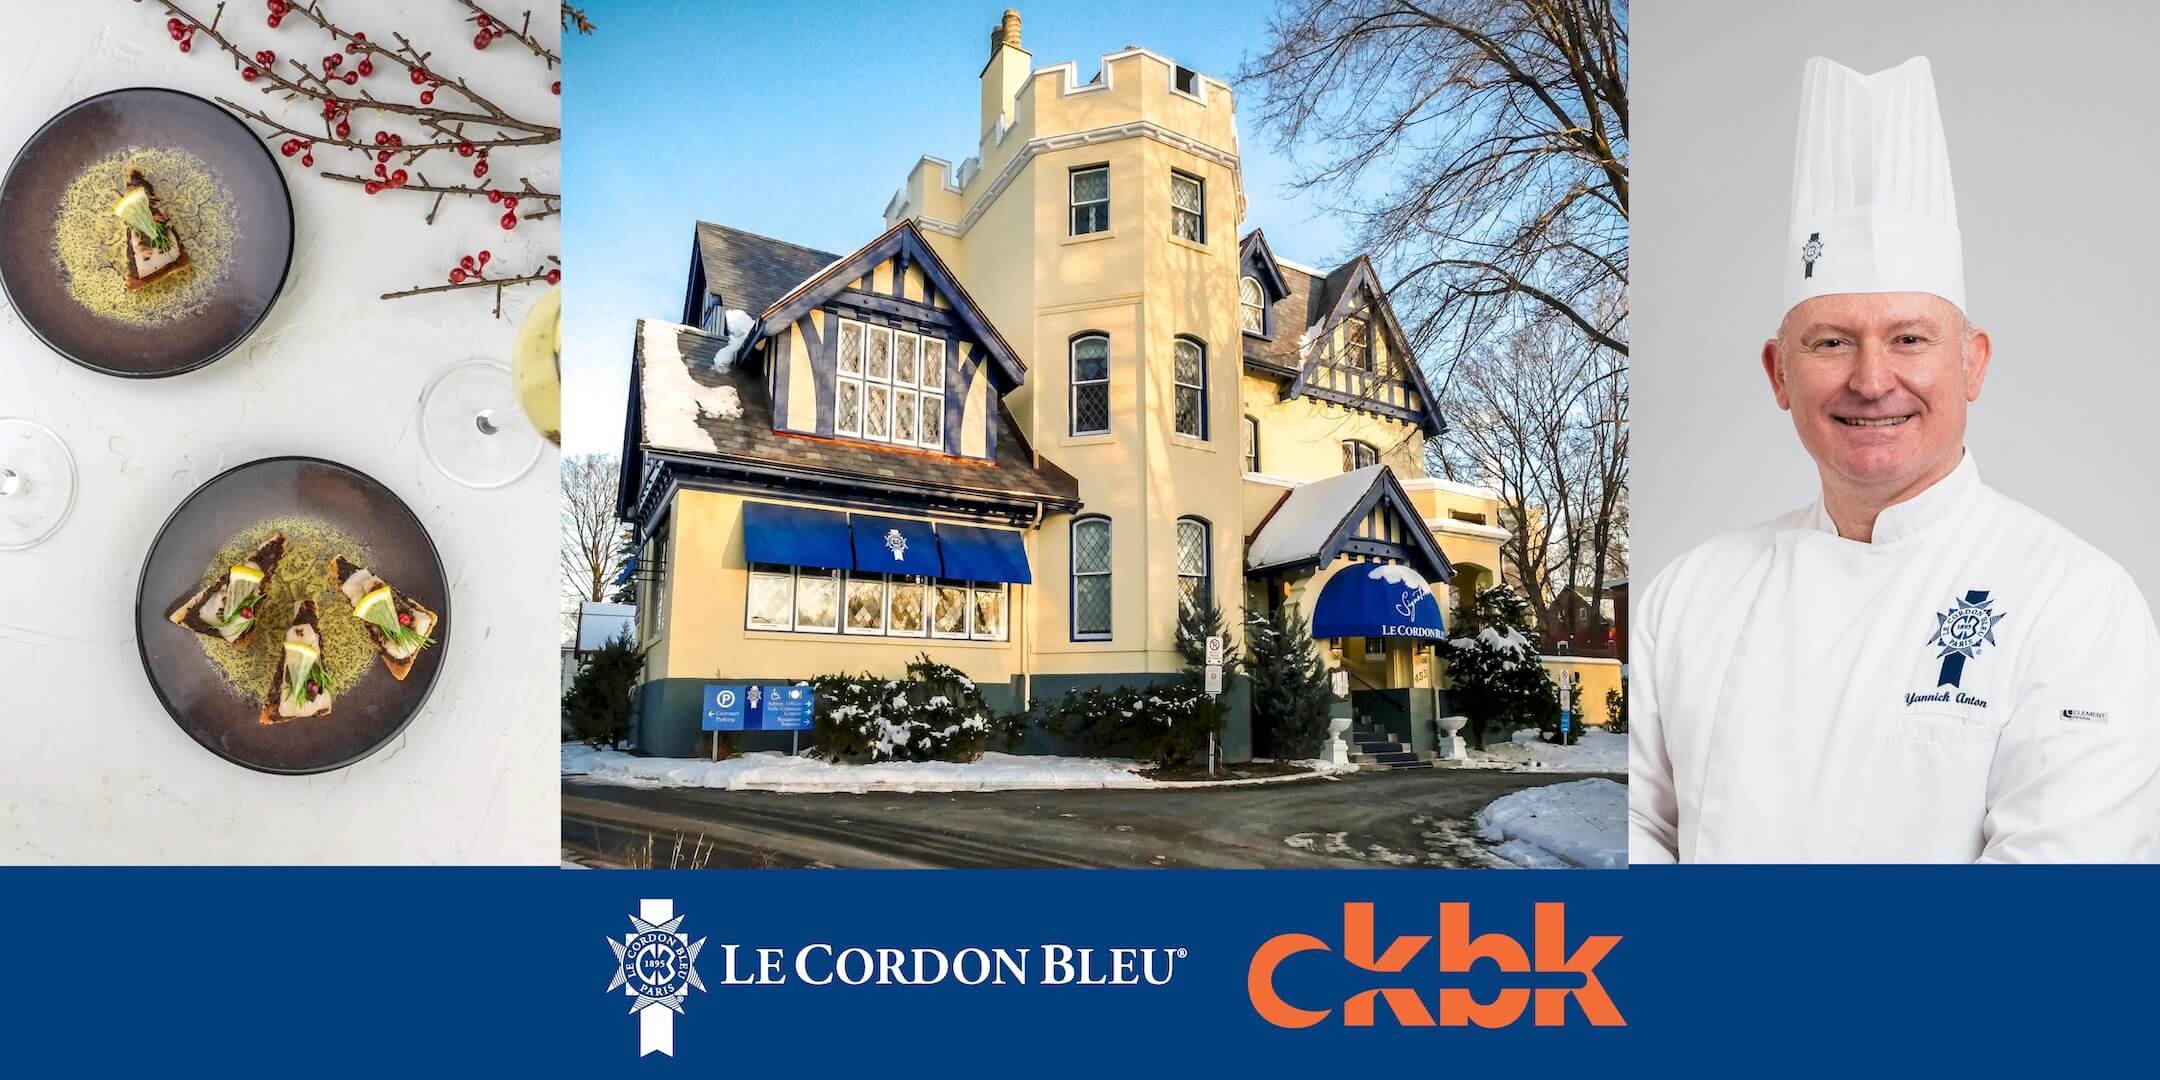 Christmas cooking: Watch the replay of our demo and Q&A with Le Cordon Bleu chef Yannick Anton